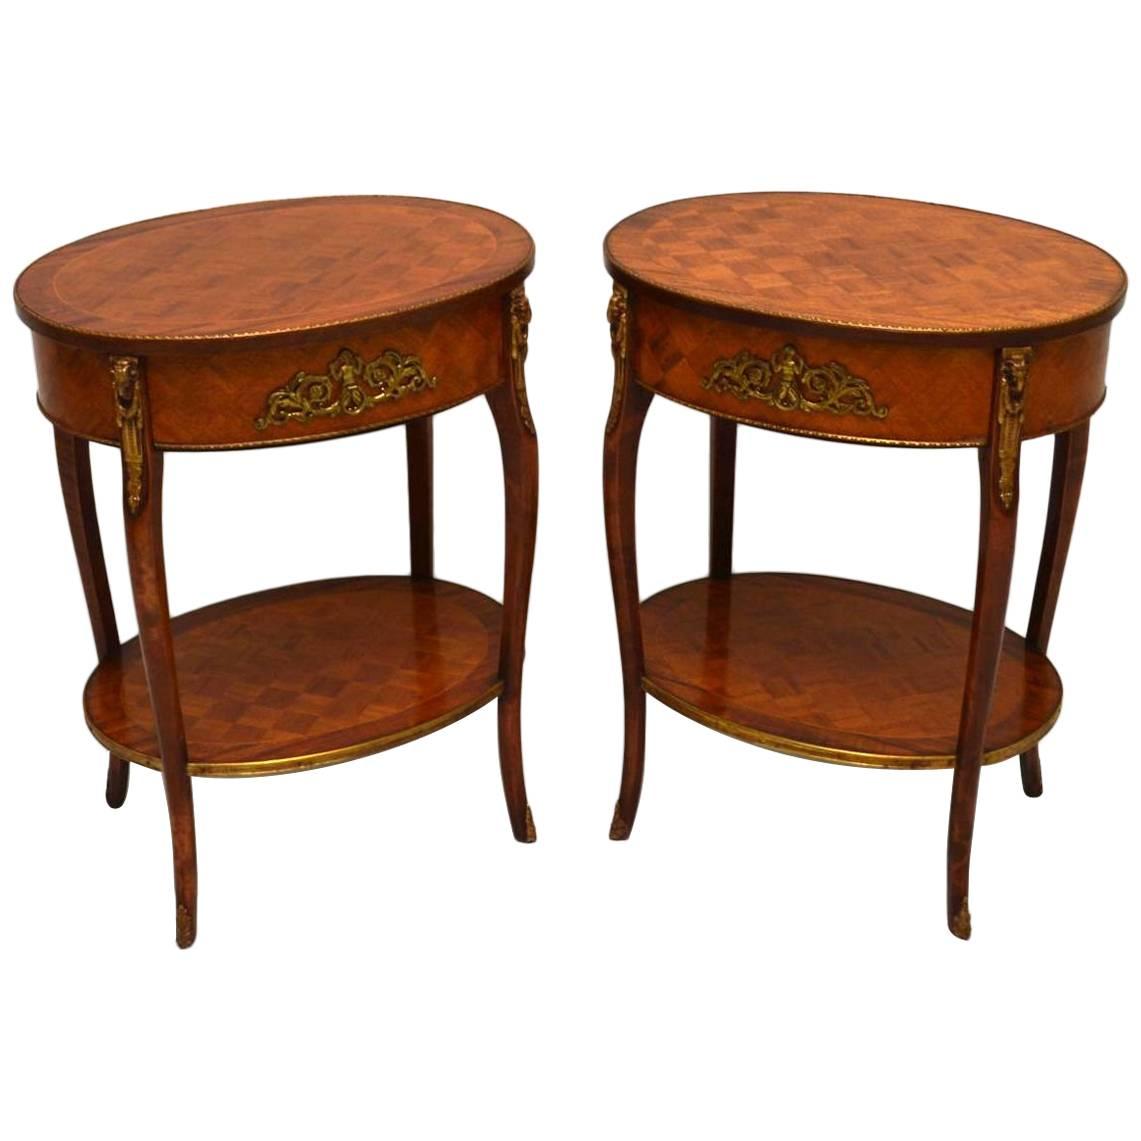 Pair of Antique French Parquetry Top Tables